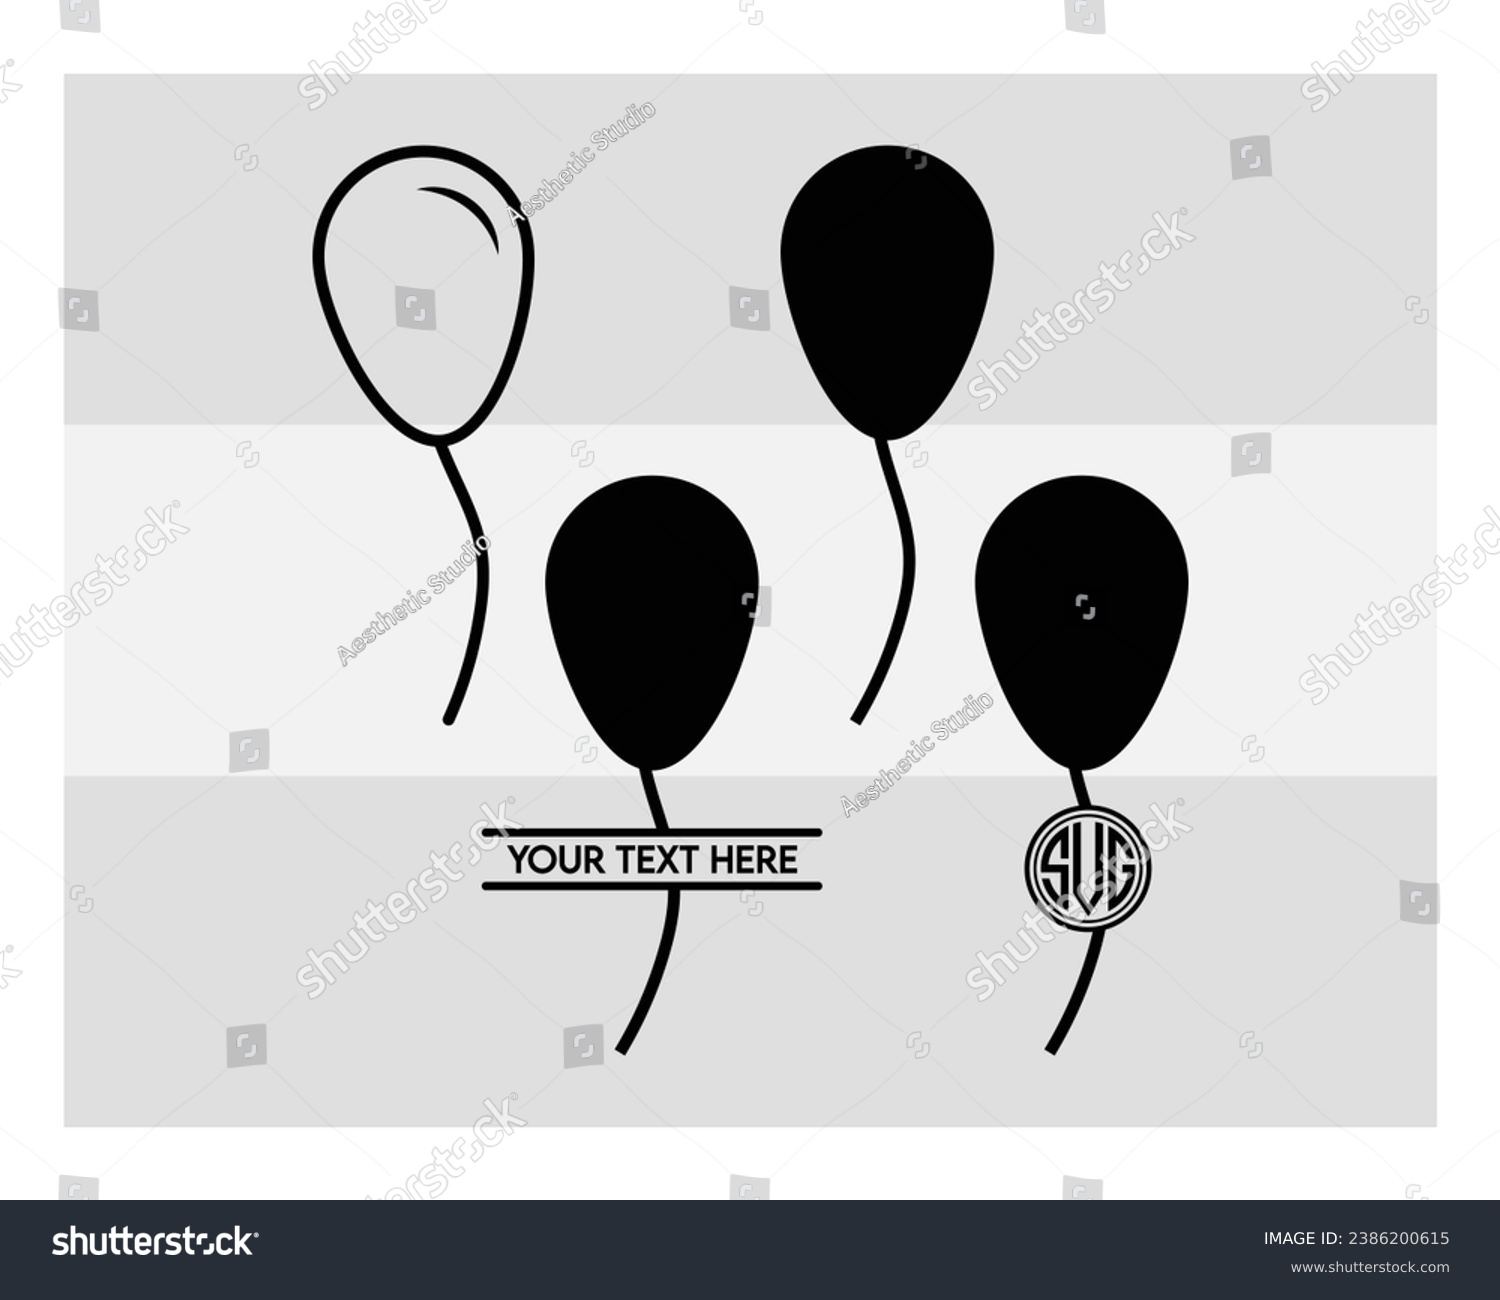 SVG of Balloons,  Balloons Silhouette, Happy Birthday, celebrate, celebration png, party, Balloon Vector, valentines day, Eps svg